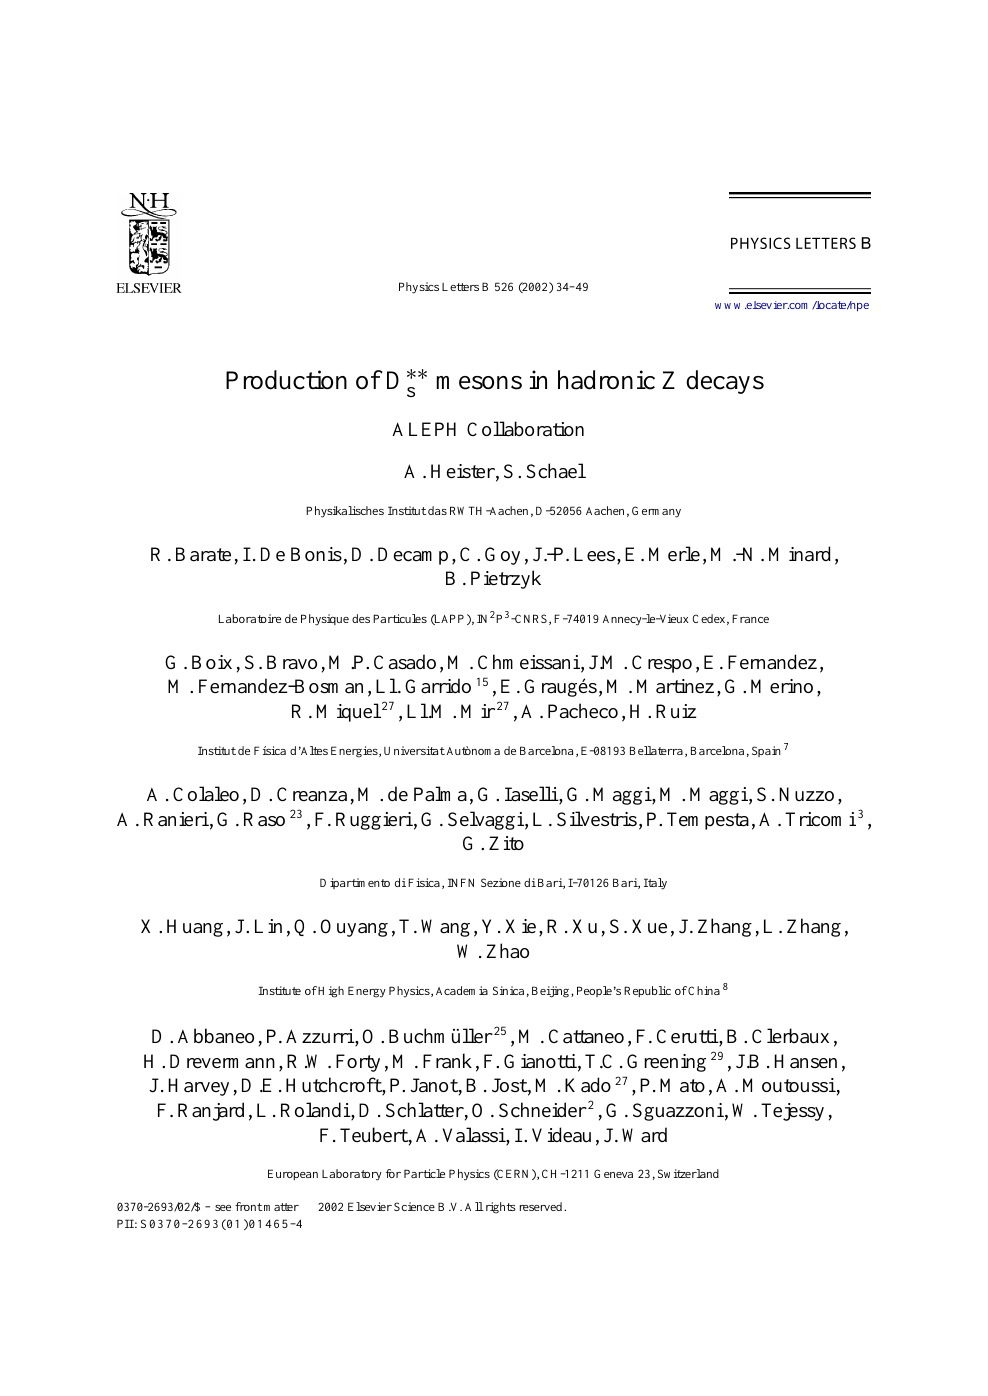 Production Of Ds Mesons In Hadronic Z Decays Topic Of Research Paper In Physical Sciences Download Scholarly Article Pdf And Read For Free On Cyberleninka Open Science Hub